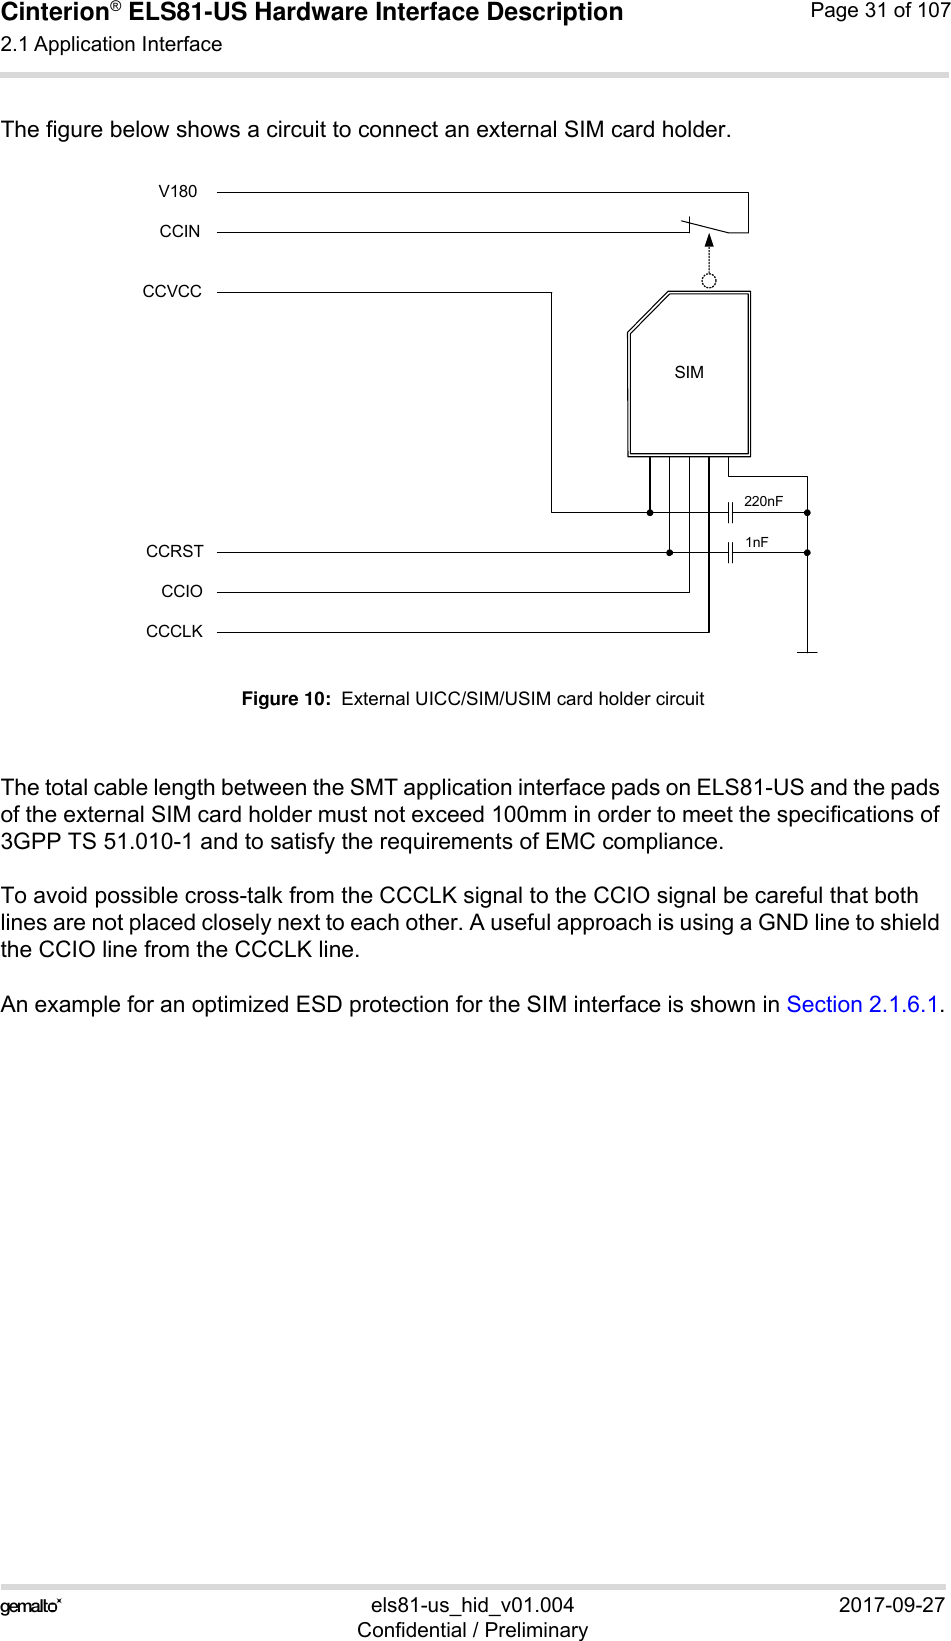 Cinterion® ELS81-US Hardware Interface Description2.1 Application Interface53els81-us_hid_v01.004 2017-09-27Confidential / PreliminaryPage 31 of 107The figure below shows a circuit to connect an external SIM card holder.Figure 10:  External UICC/SIM/USIM card holder circuitThe total cable length between the SMT application interface pads on ELS81-US and the pads of the external SIM card holder must not exceed 100mm in order to meet the specifications of 3GPP TS 51.010-1 and to satisfy the requirements of EMC compliance.To avoid possible cross-talk from the CCCLK signal to the CCIO signal be careful that both lines are not placed closely next to each other. A useful approach is using a GND line to shield the CCIO line from the CCCLK line.An example for an optimized ESD protection for the SIM interface is shown in Section 2.1.6.1.SIMCCVCCCCRSTCCIOCCCLK220nF1nFCCINV180